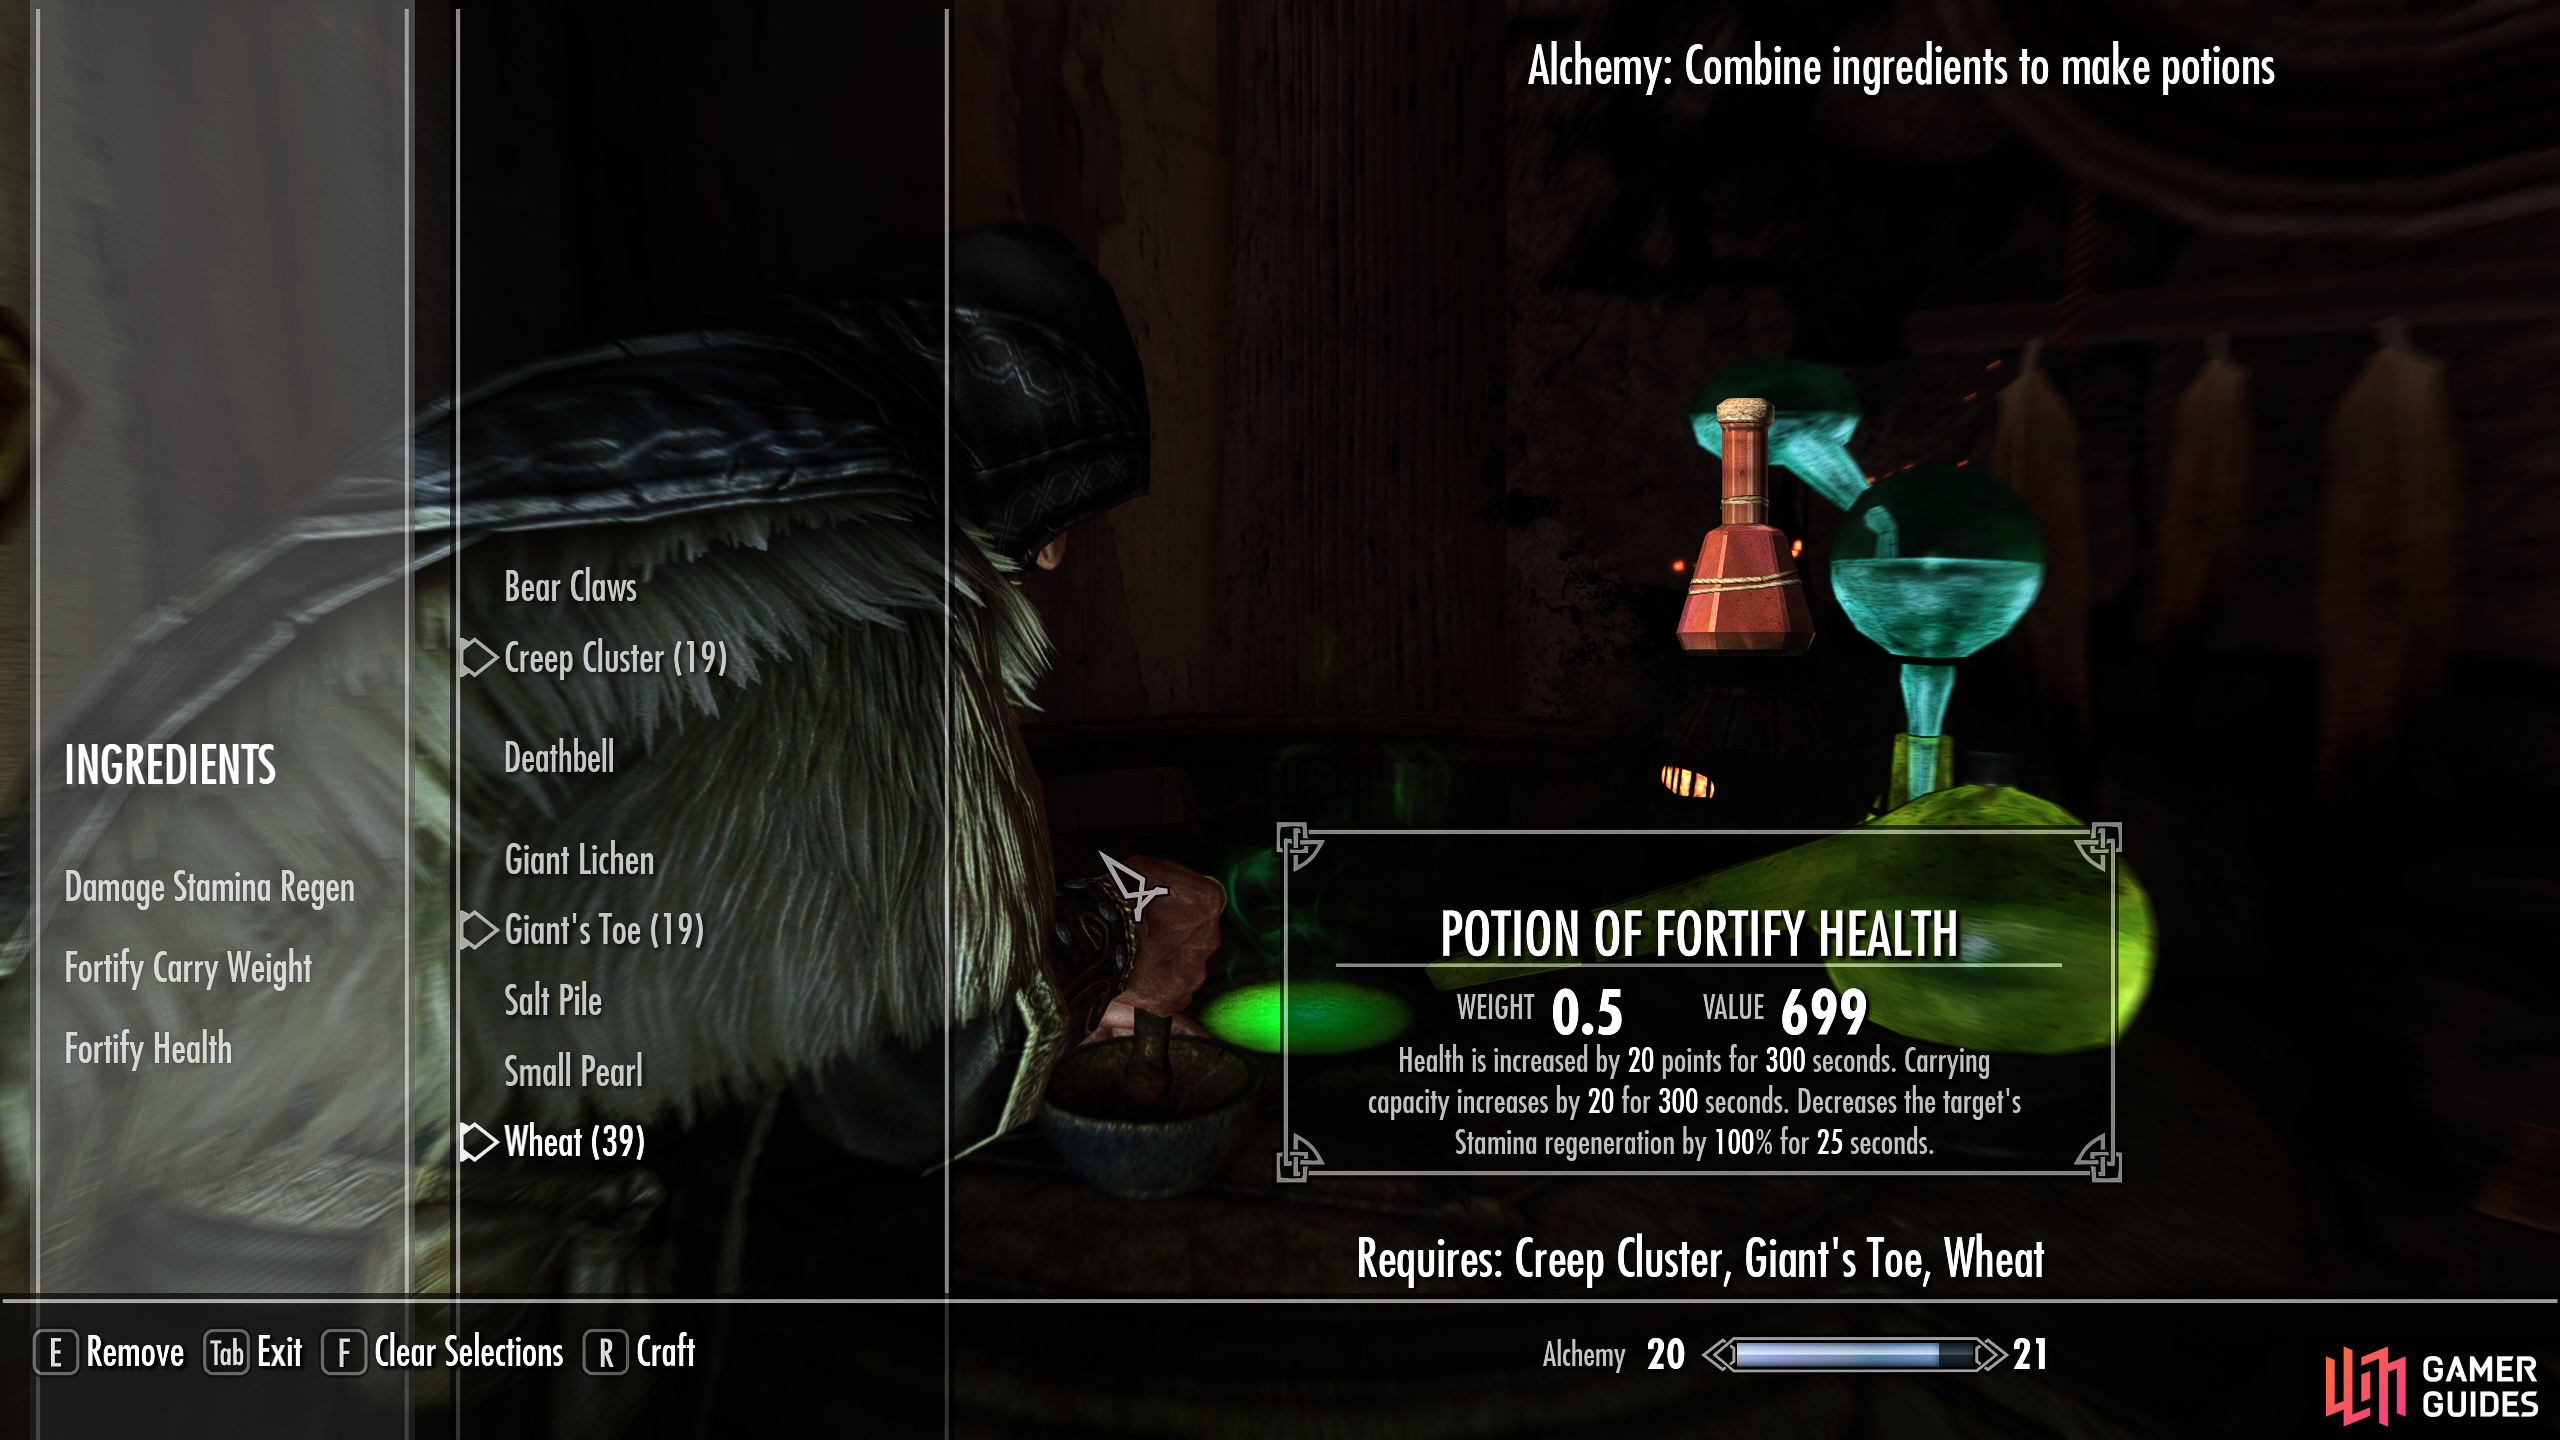 Combine ingredients with the same properties to make useful (and valuable) potions and poisons.